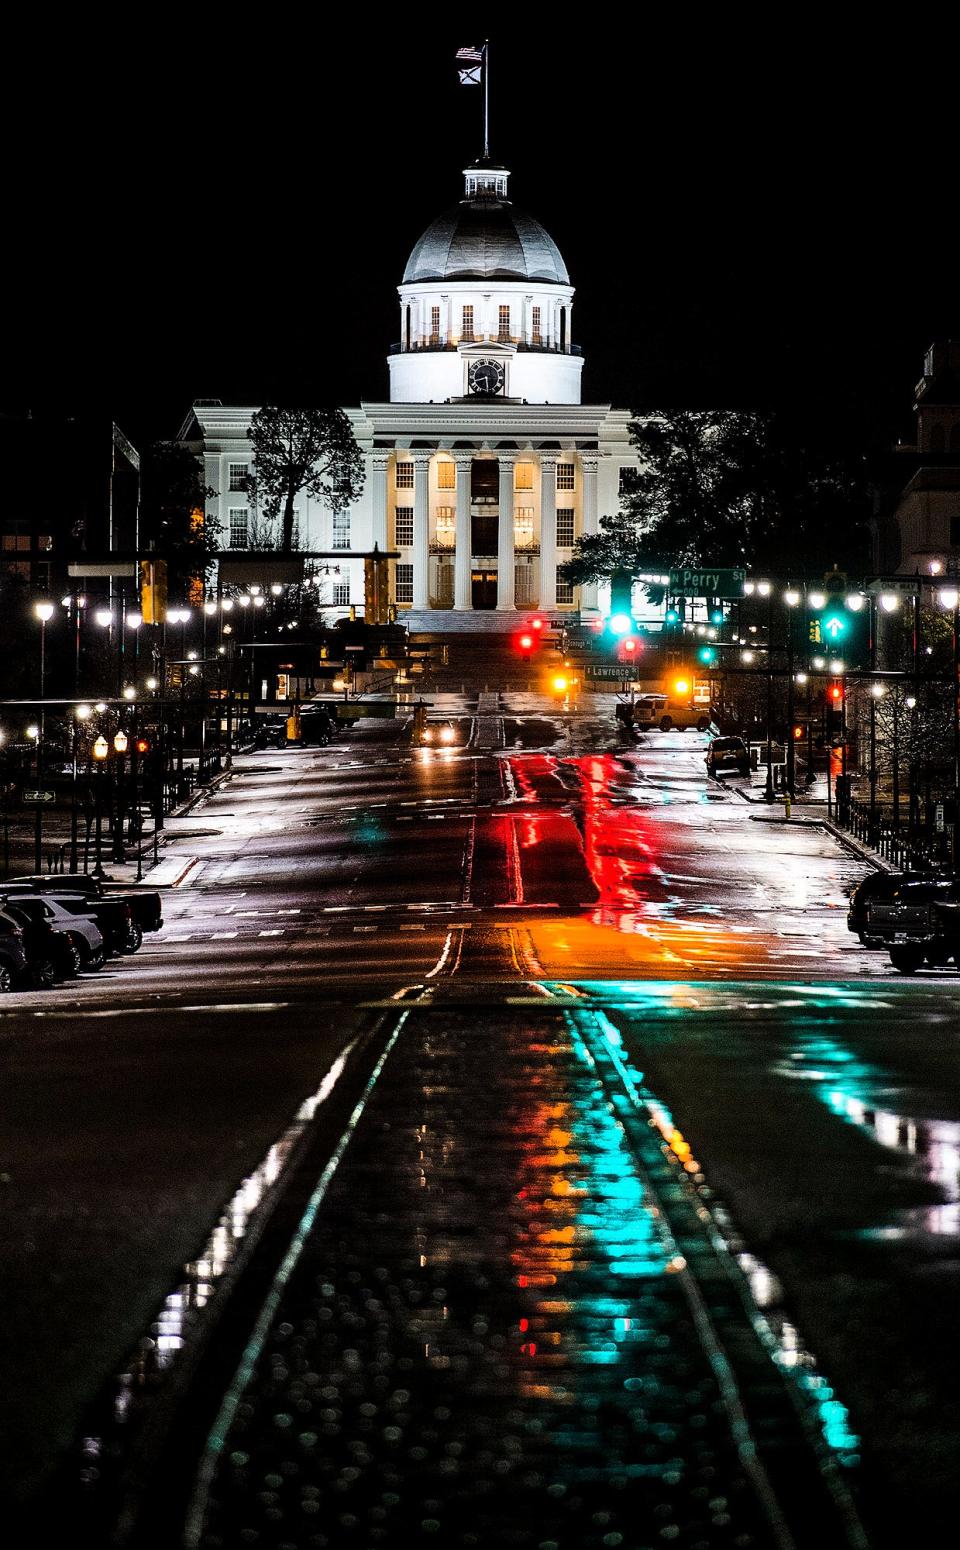 The Alabama State Capitol Building is seen on a rainy night on Dexter Avenue in Montgomery, Ala., on Wednesday February 5, 2020.